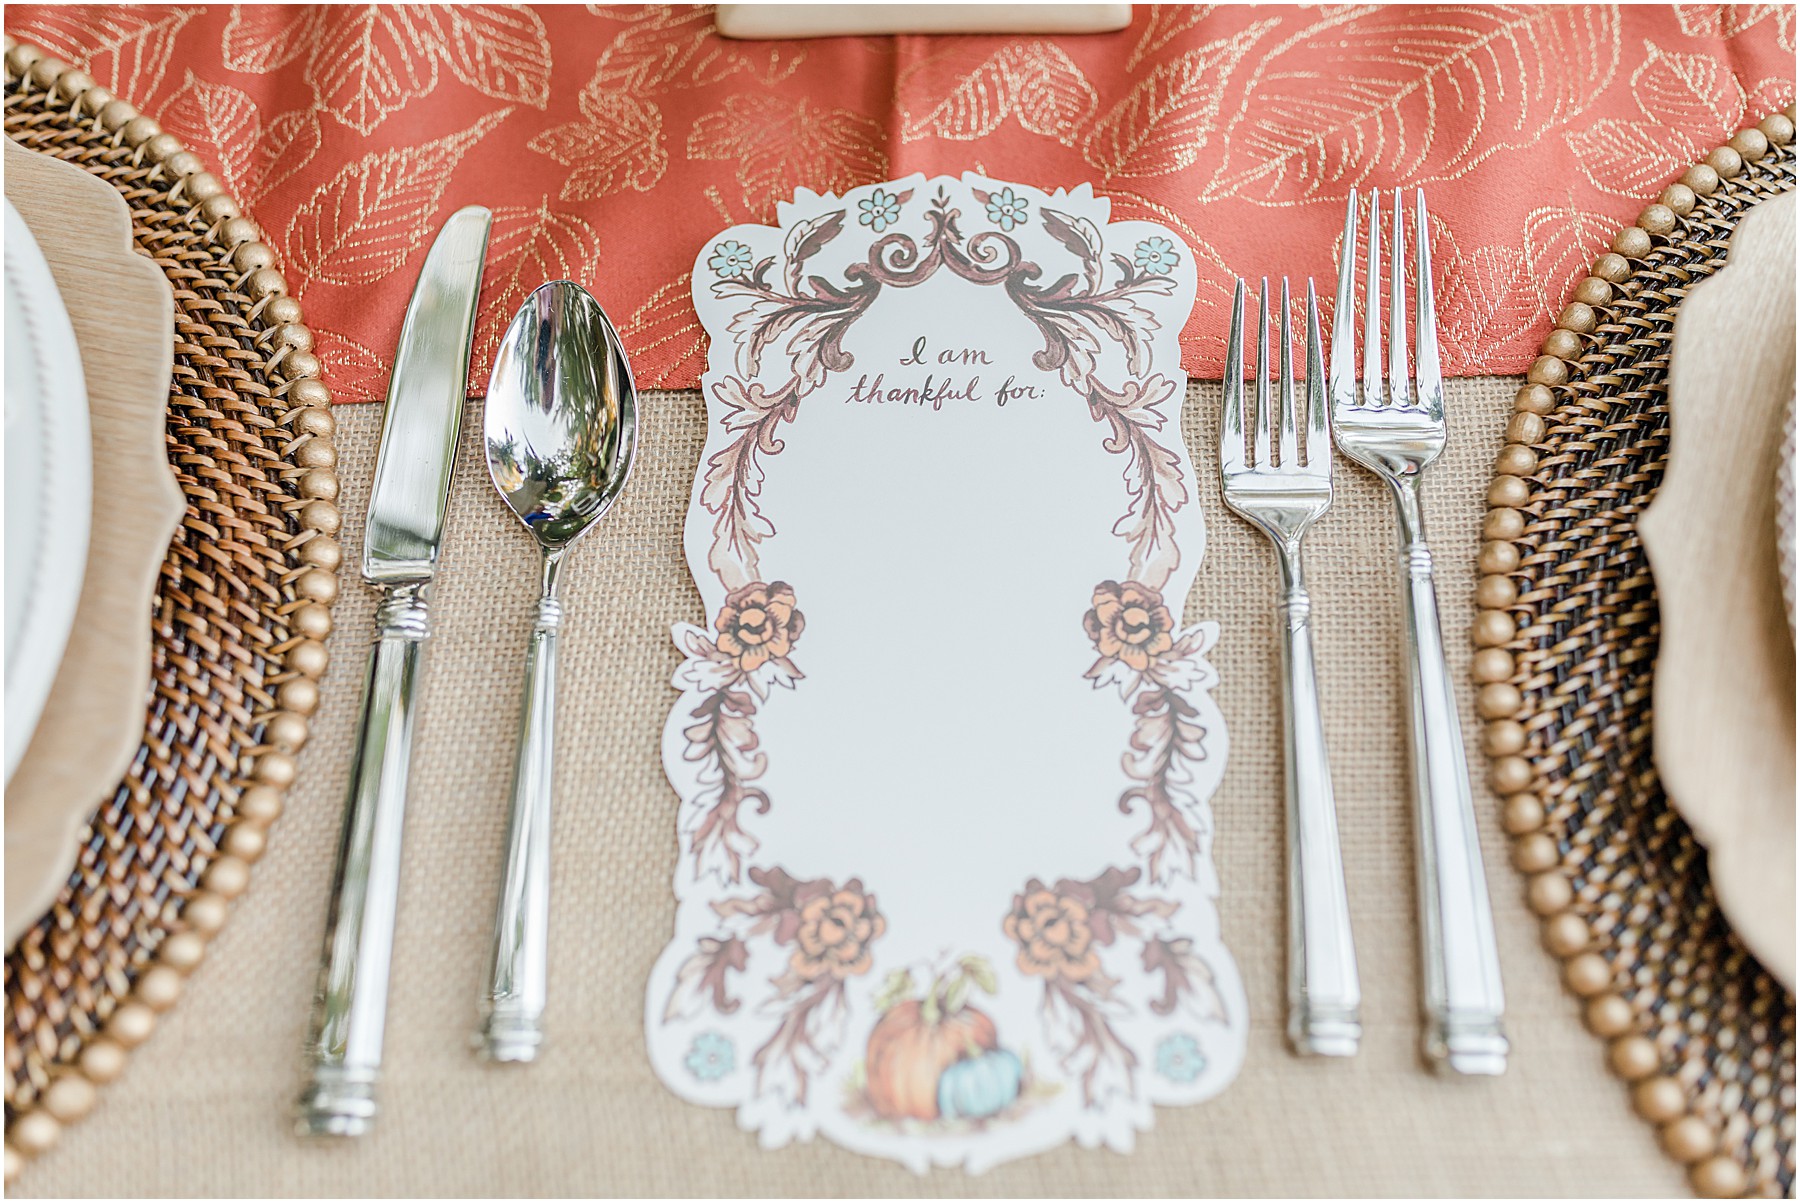 A Thanksgiving table decor featuring a paper to write what you are thankful for.